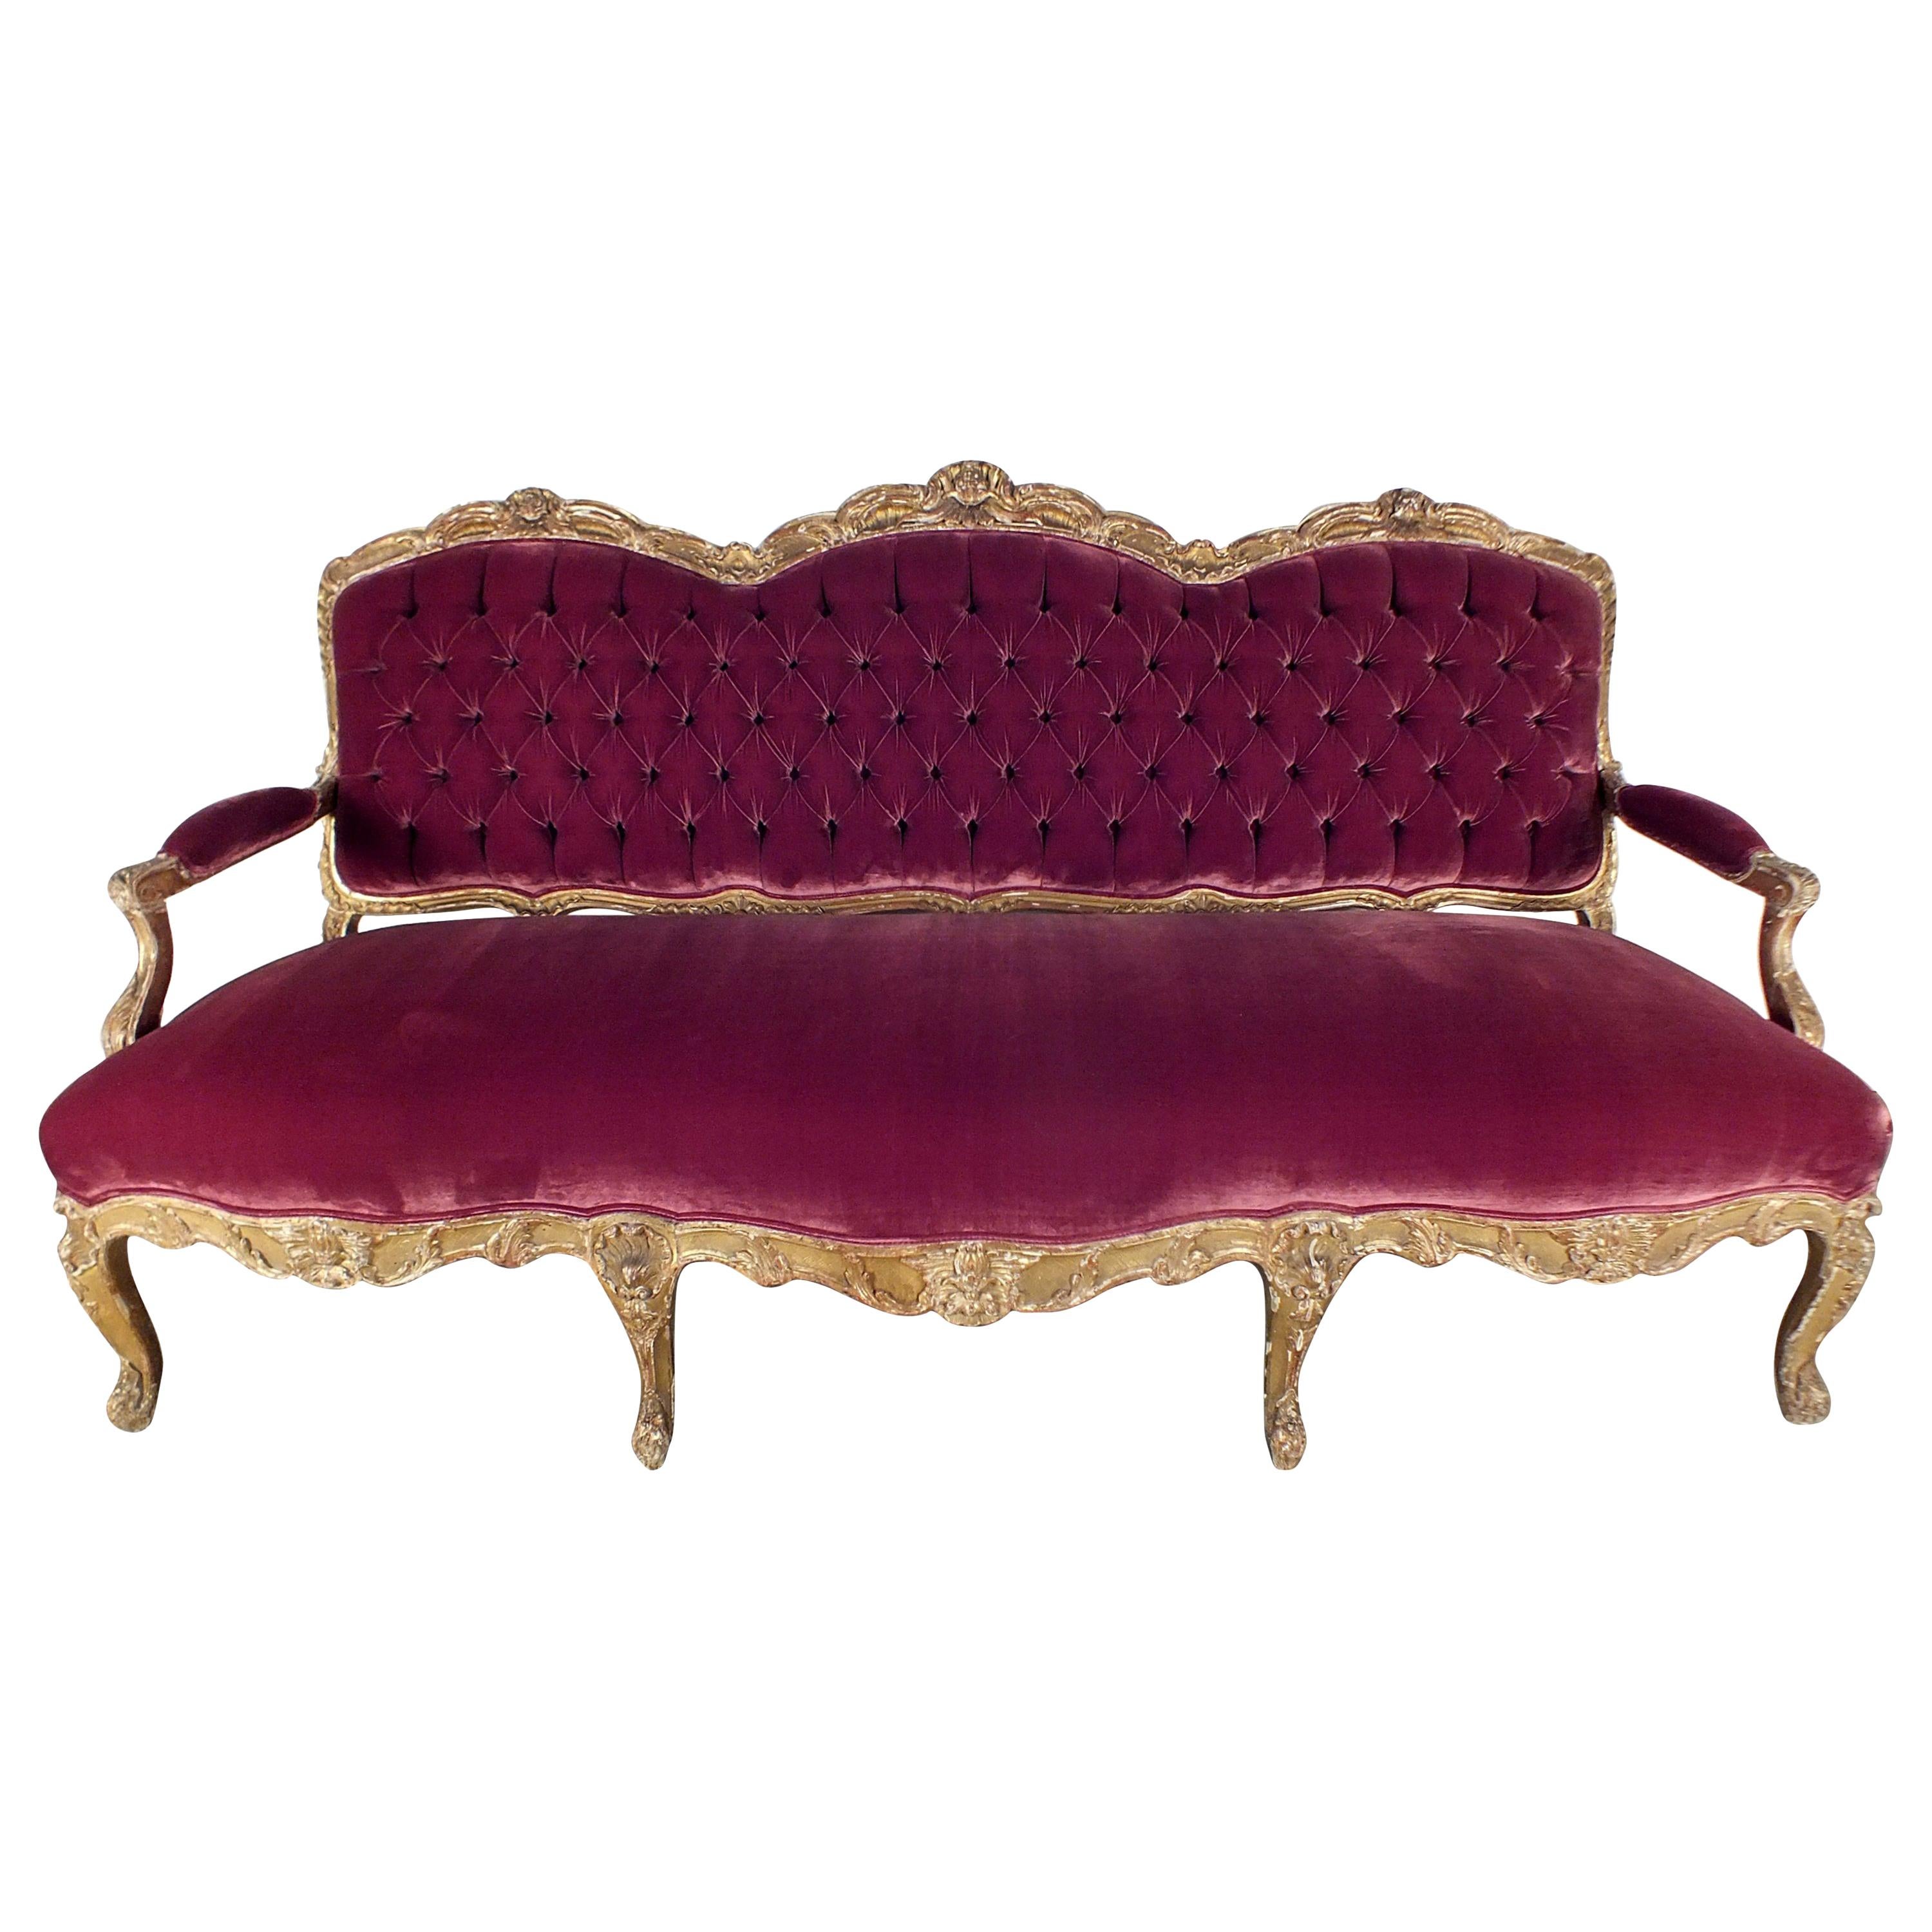 This one-of-a-kind late 18th century Louis XV sofa has been restored by our expert craftsmen and features a solid wood frame with its original gilt finish. The sofa frame is intricate hand carvings of scrolls, leaves, and flowers, seashells, and big